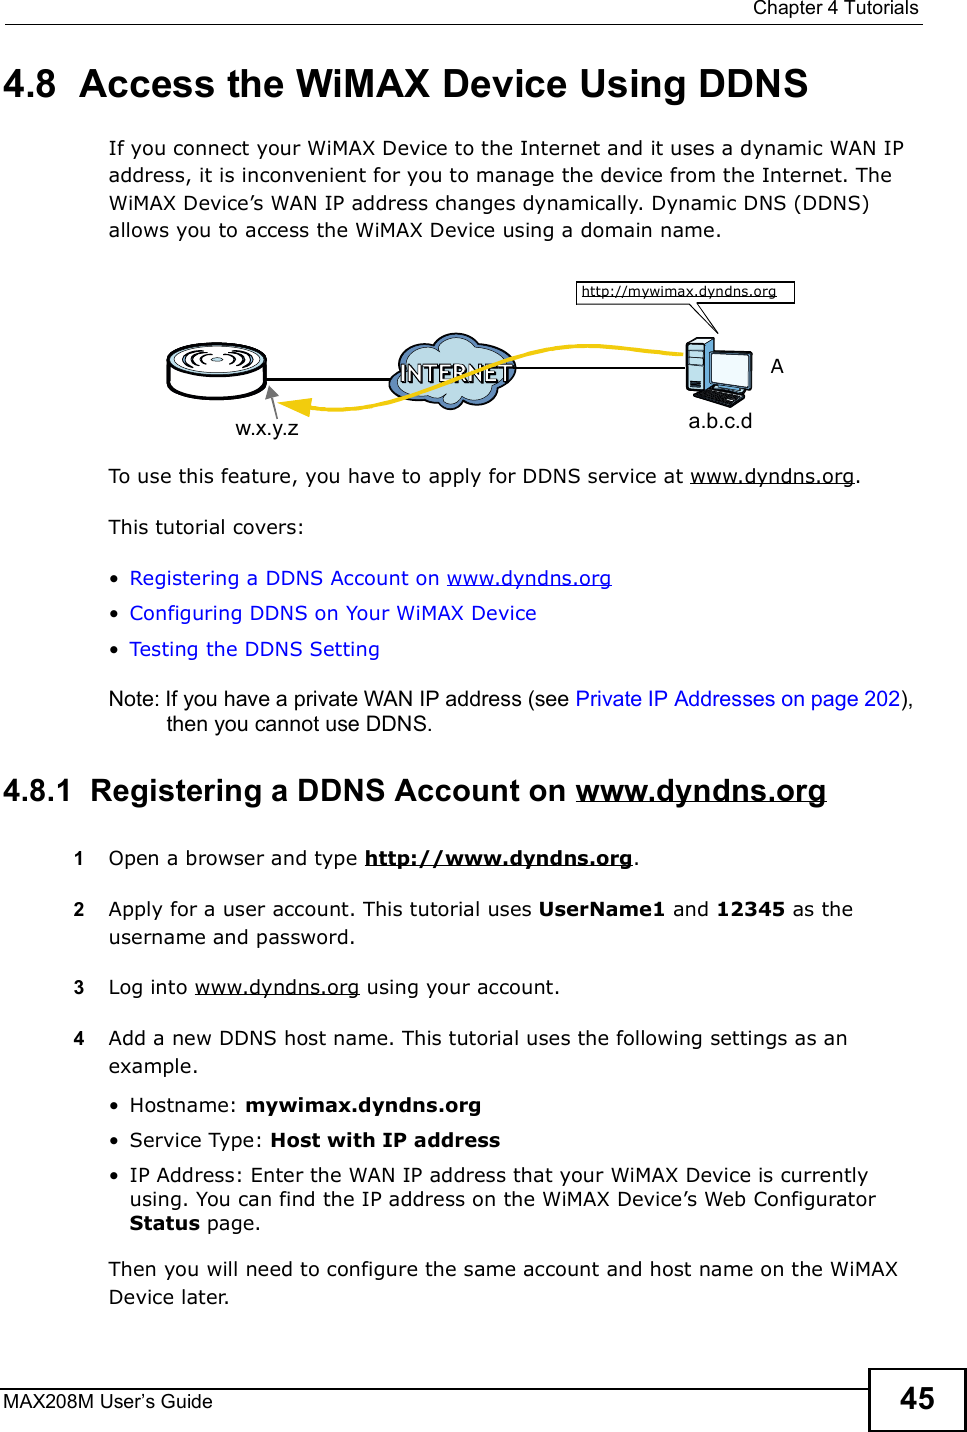  Chapter 4TutorialsMAX208M User s Guide 454.8  Access the WiMAX Device Using DDNSIf you connect your WiMAX Device to the Internet and it uses a dynamic WAN IP address, it is inconvenient for you to manage the device from the Internet. The WiMAX Device s WAN IP address changes dynamically. Dynamic DNS (DDNS) allows you to access the WiMAX Device using a domain name. To use this feature, you have to apply for DDNS service at www.dyndns.org.This tutorial covers:!Registering a DDNS Account on www.dyndns.org!Configuring DDNS on Your WiMAX Device!Testing the DDNS SettingNote: If you have a private WAN IP address (see Private IP Addresses on page 202), then you cannot use DDNS.4.8.1  Registering a DDNS Account on www.dyndns.org1Open a browser and type http://www.dyndns.org.2Apply for a user account. This tutorial uses UserName1 and 12345 as the username and password.3Log into www.dyndns.org using your account.4Add a new DDNS host name. This tutorial uses the following settings as an example.!Hostname: mywimax.dyndns.org!Service Type: Host with IP address!IP Address: Enter the WAN IP address that your WiMAX Device is currently using. You can find the IP address on the WiMAX Device s Web Configurator Status page.Then you will need to configure the same account and host name on the WiMAX Device later.w.x.y.z a.b.c.dhttp://mywimax.dyndns.orgA